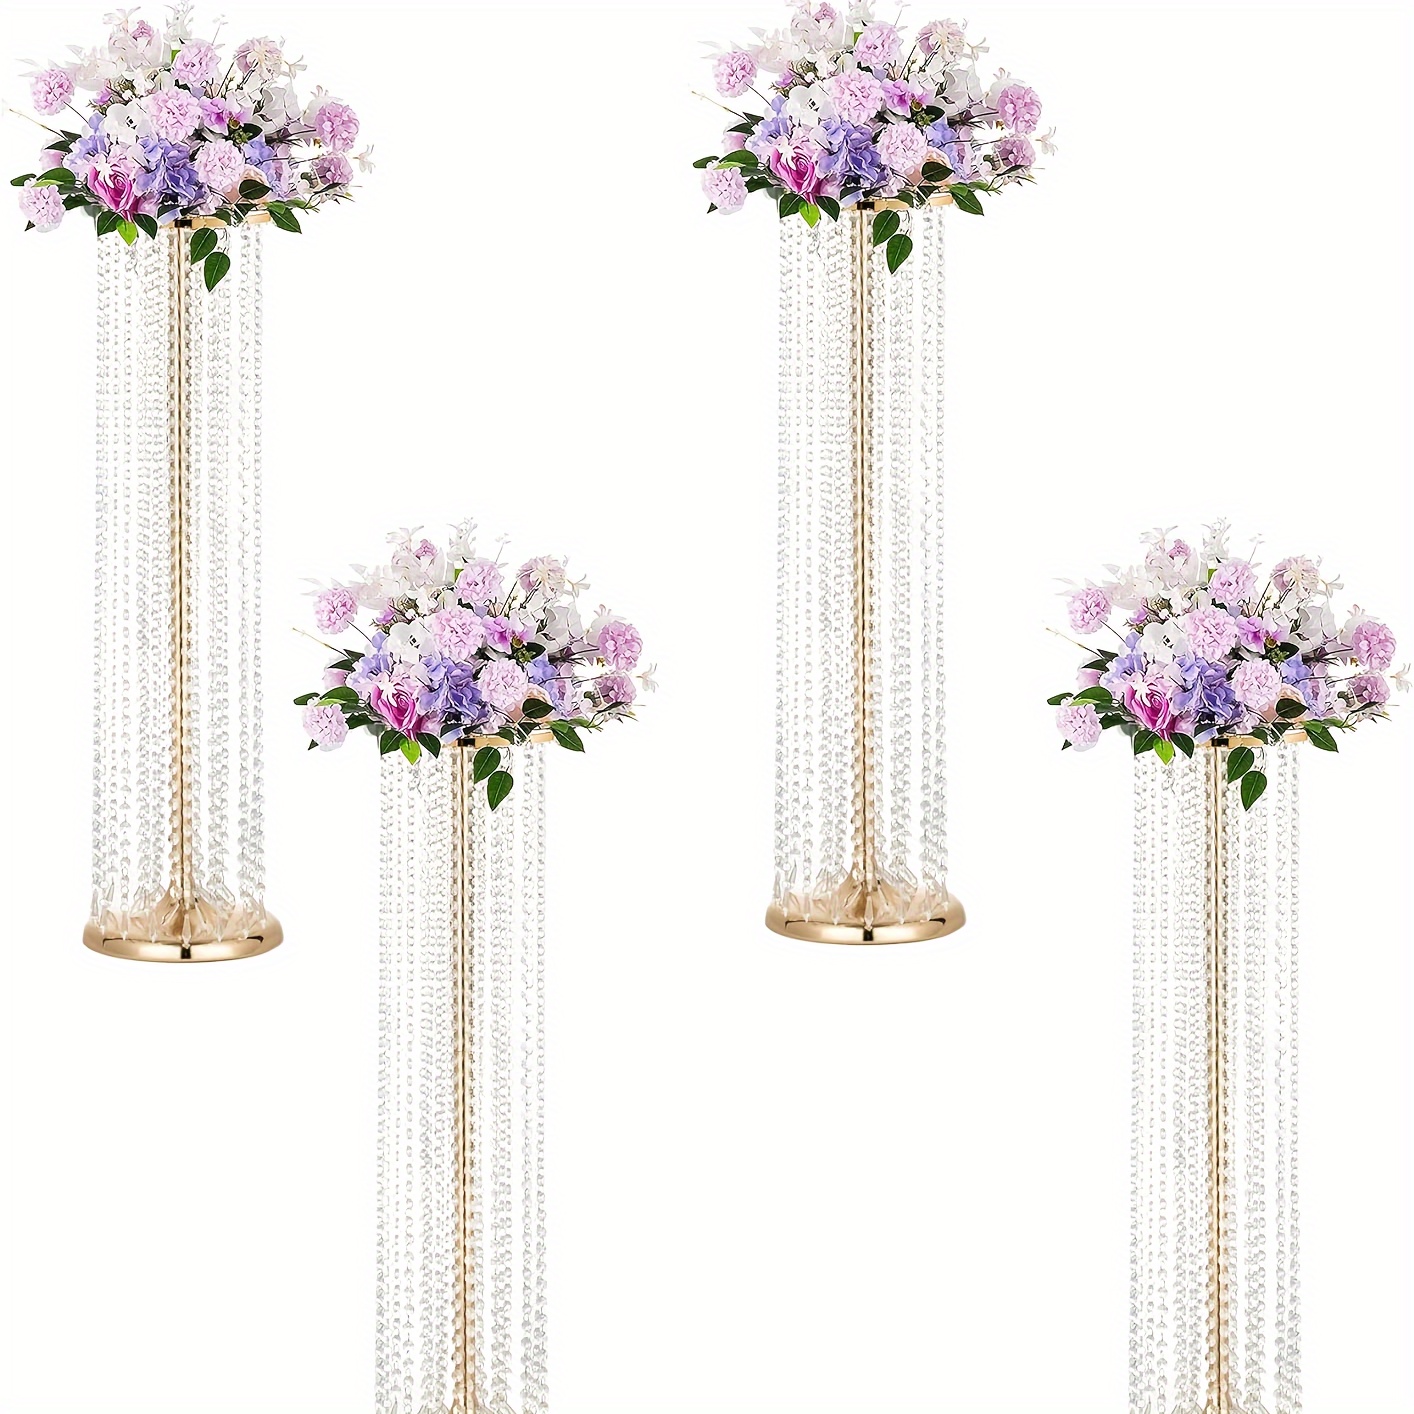 

Set Of 4 Luxurious Crystal Flower Stand Wedding Centerpieces On Floor Tall Metal Flower Arrangement Stand Tabletop Flower Vase For Wedding Party Hotel Home Decor 35.4"×4pcs